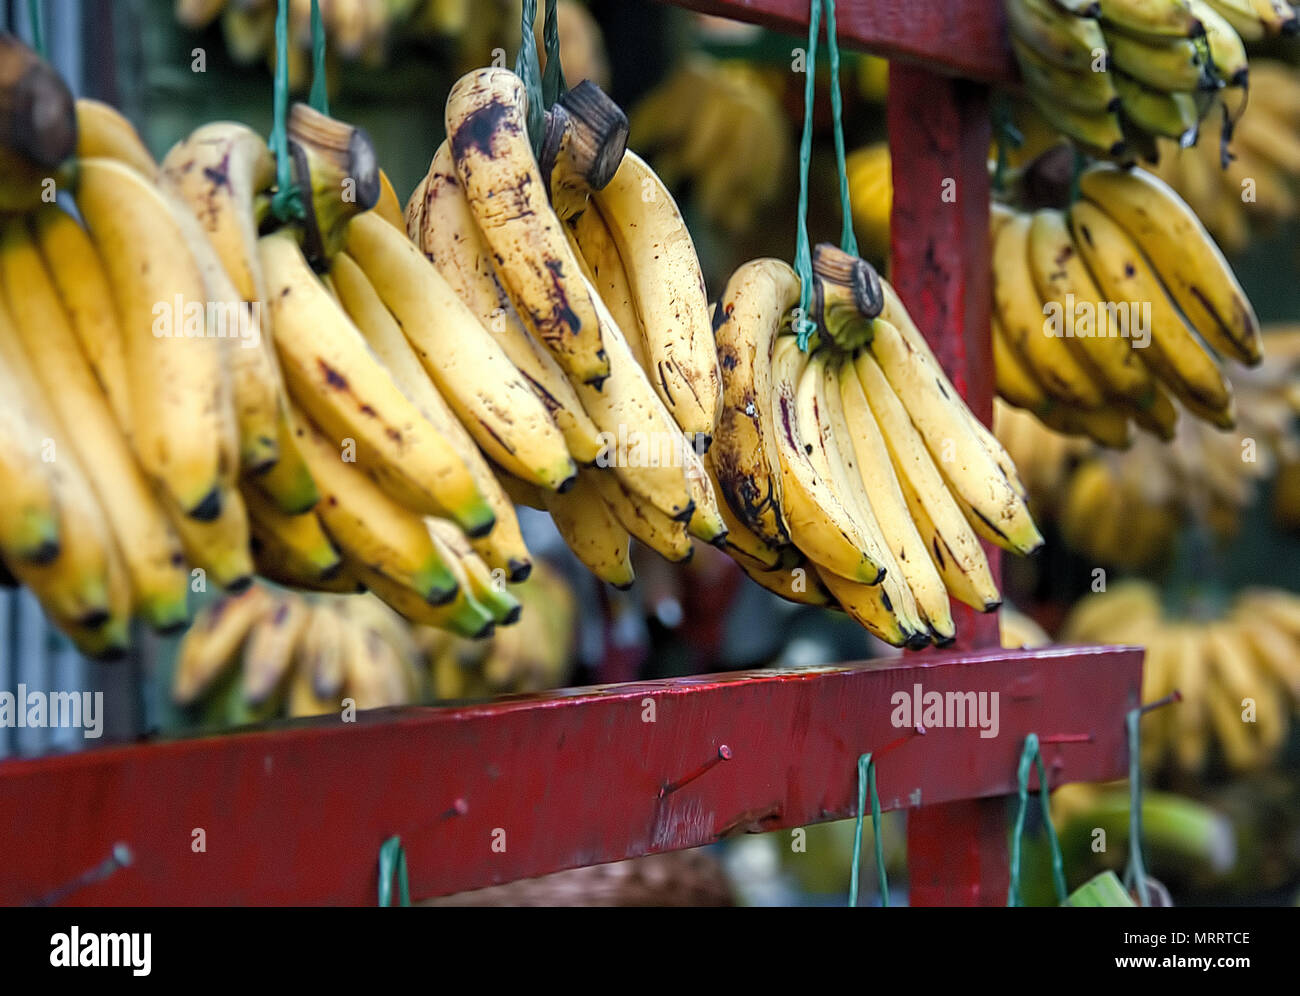 A store selling only bananas. Just Bananas. Each bunch is suspended on purple wooden bar. Some are still green, ripened yellow, and turning brown. Stock Photo